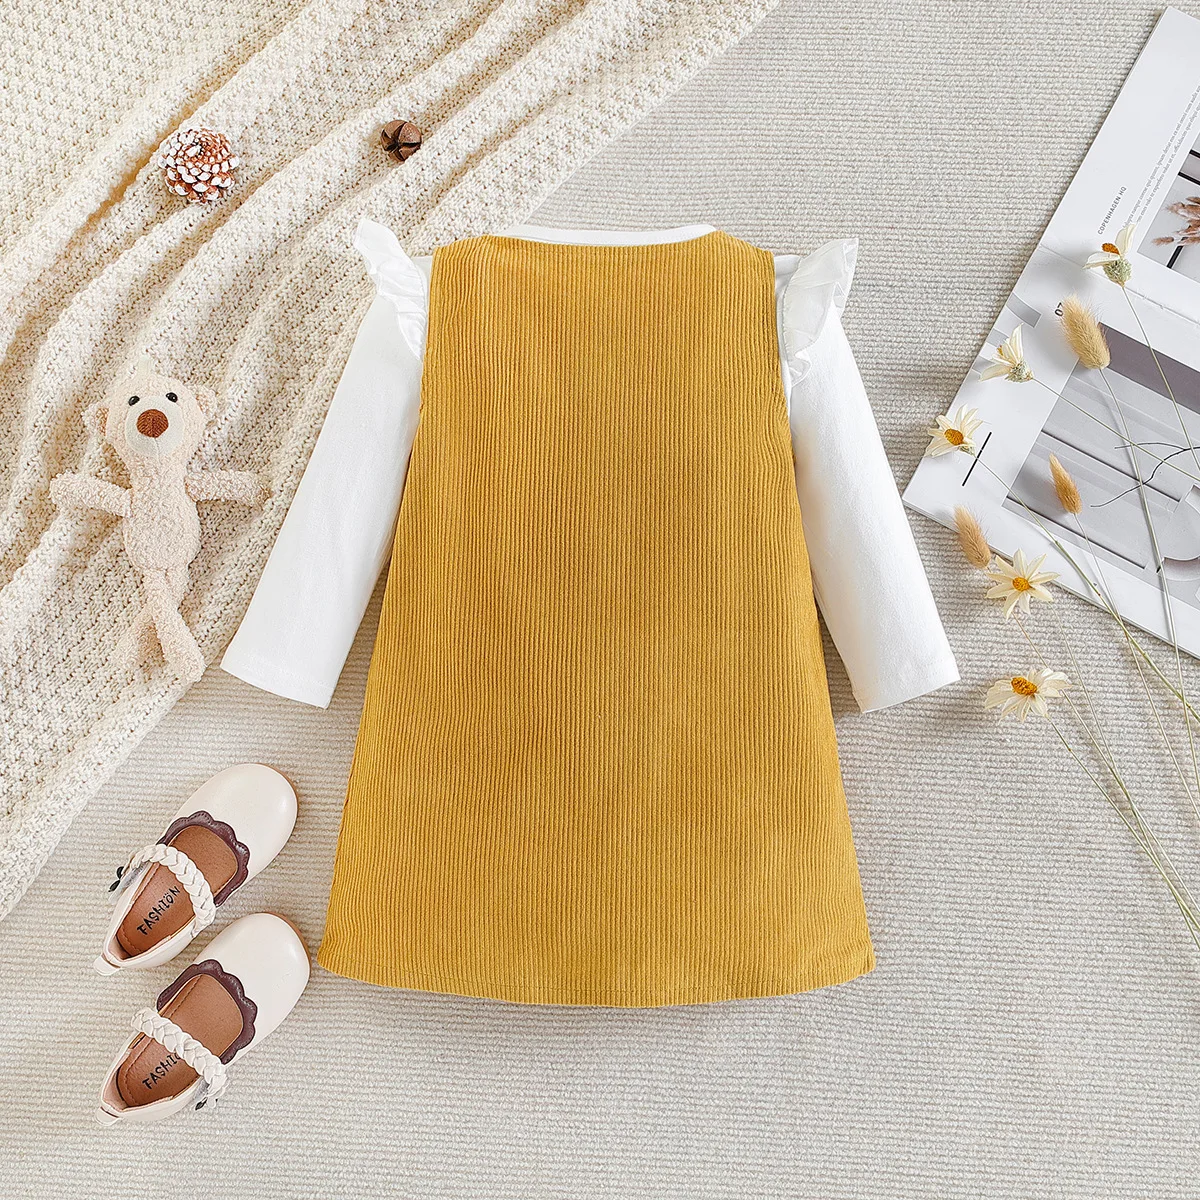 New autumn newborn infant clothing long-sleeve rompers match corduroy skirt boutique baby girls dress clothing